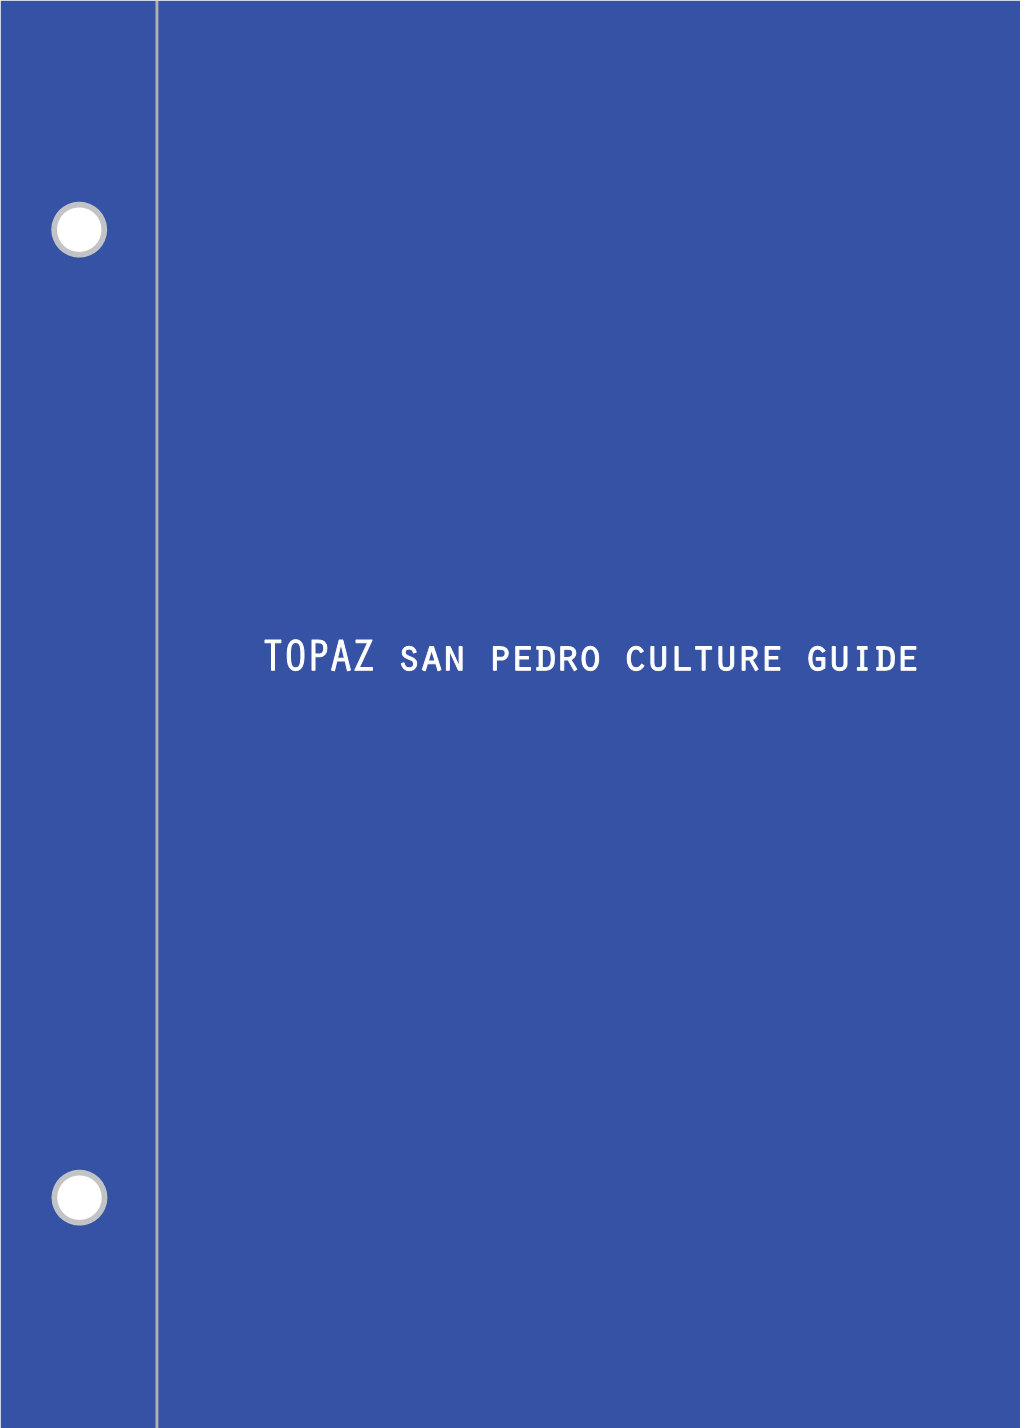 TOPAZ San Pedro Culture Guide San Pedro Is a Town with a Unique Past, a Very Cool Present, and an Up-And- Coming Future